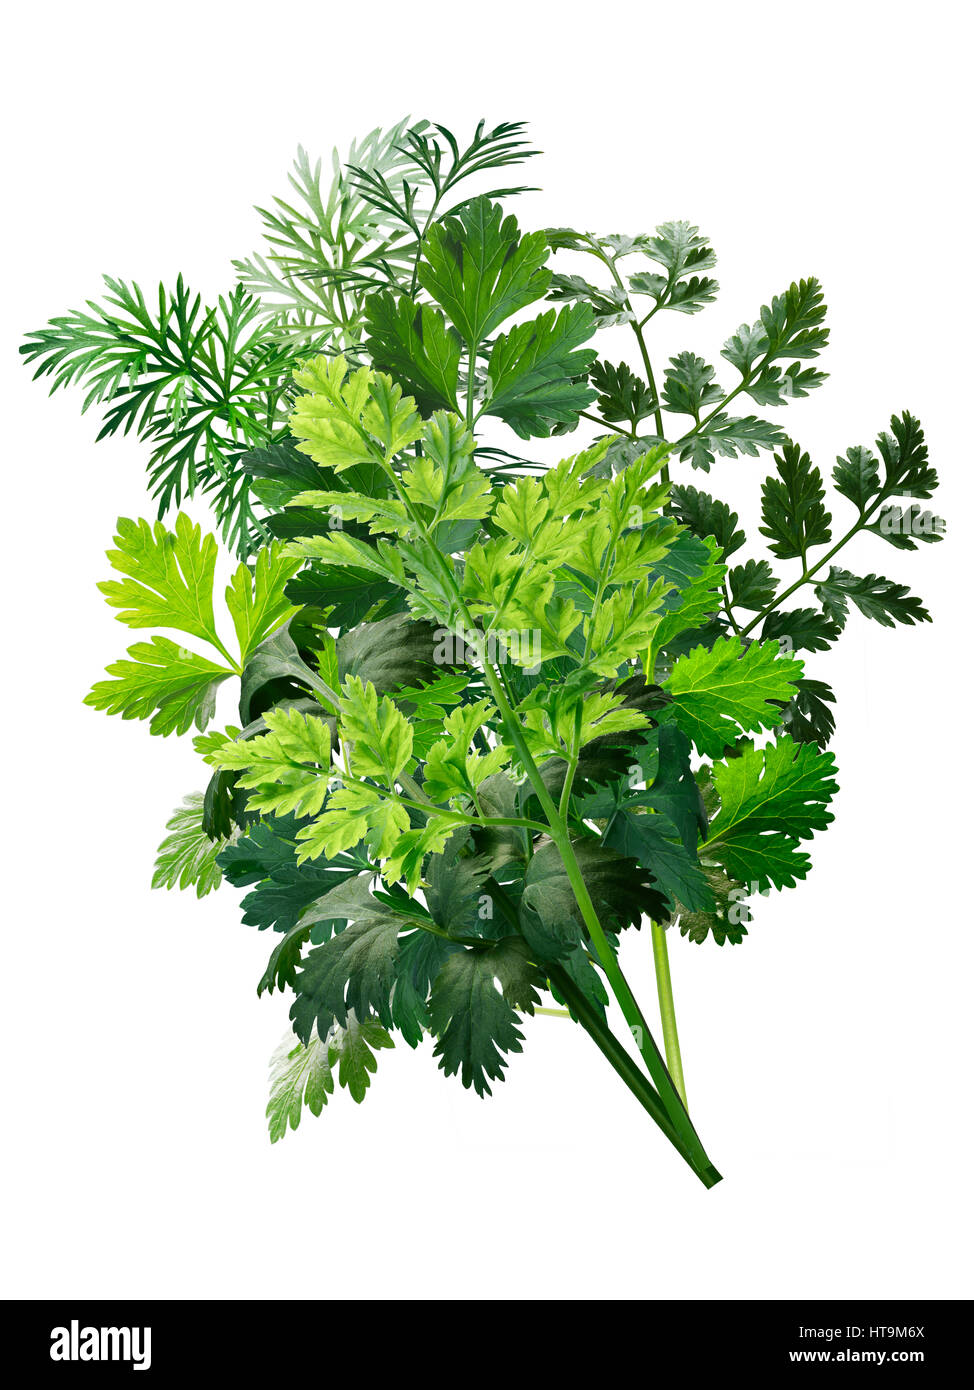 Bouquet of fresh herbs: Parsley, Chervil, Cilantro, Caraway. Clipping paths Stock Photo